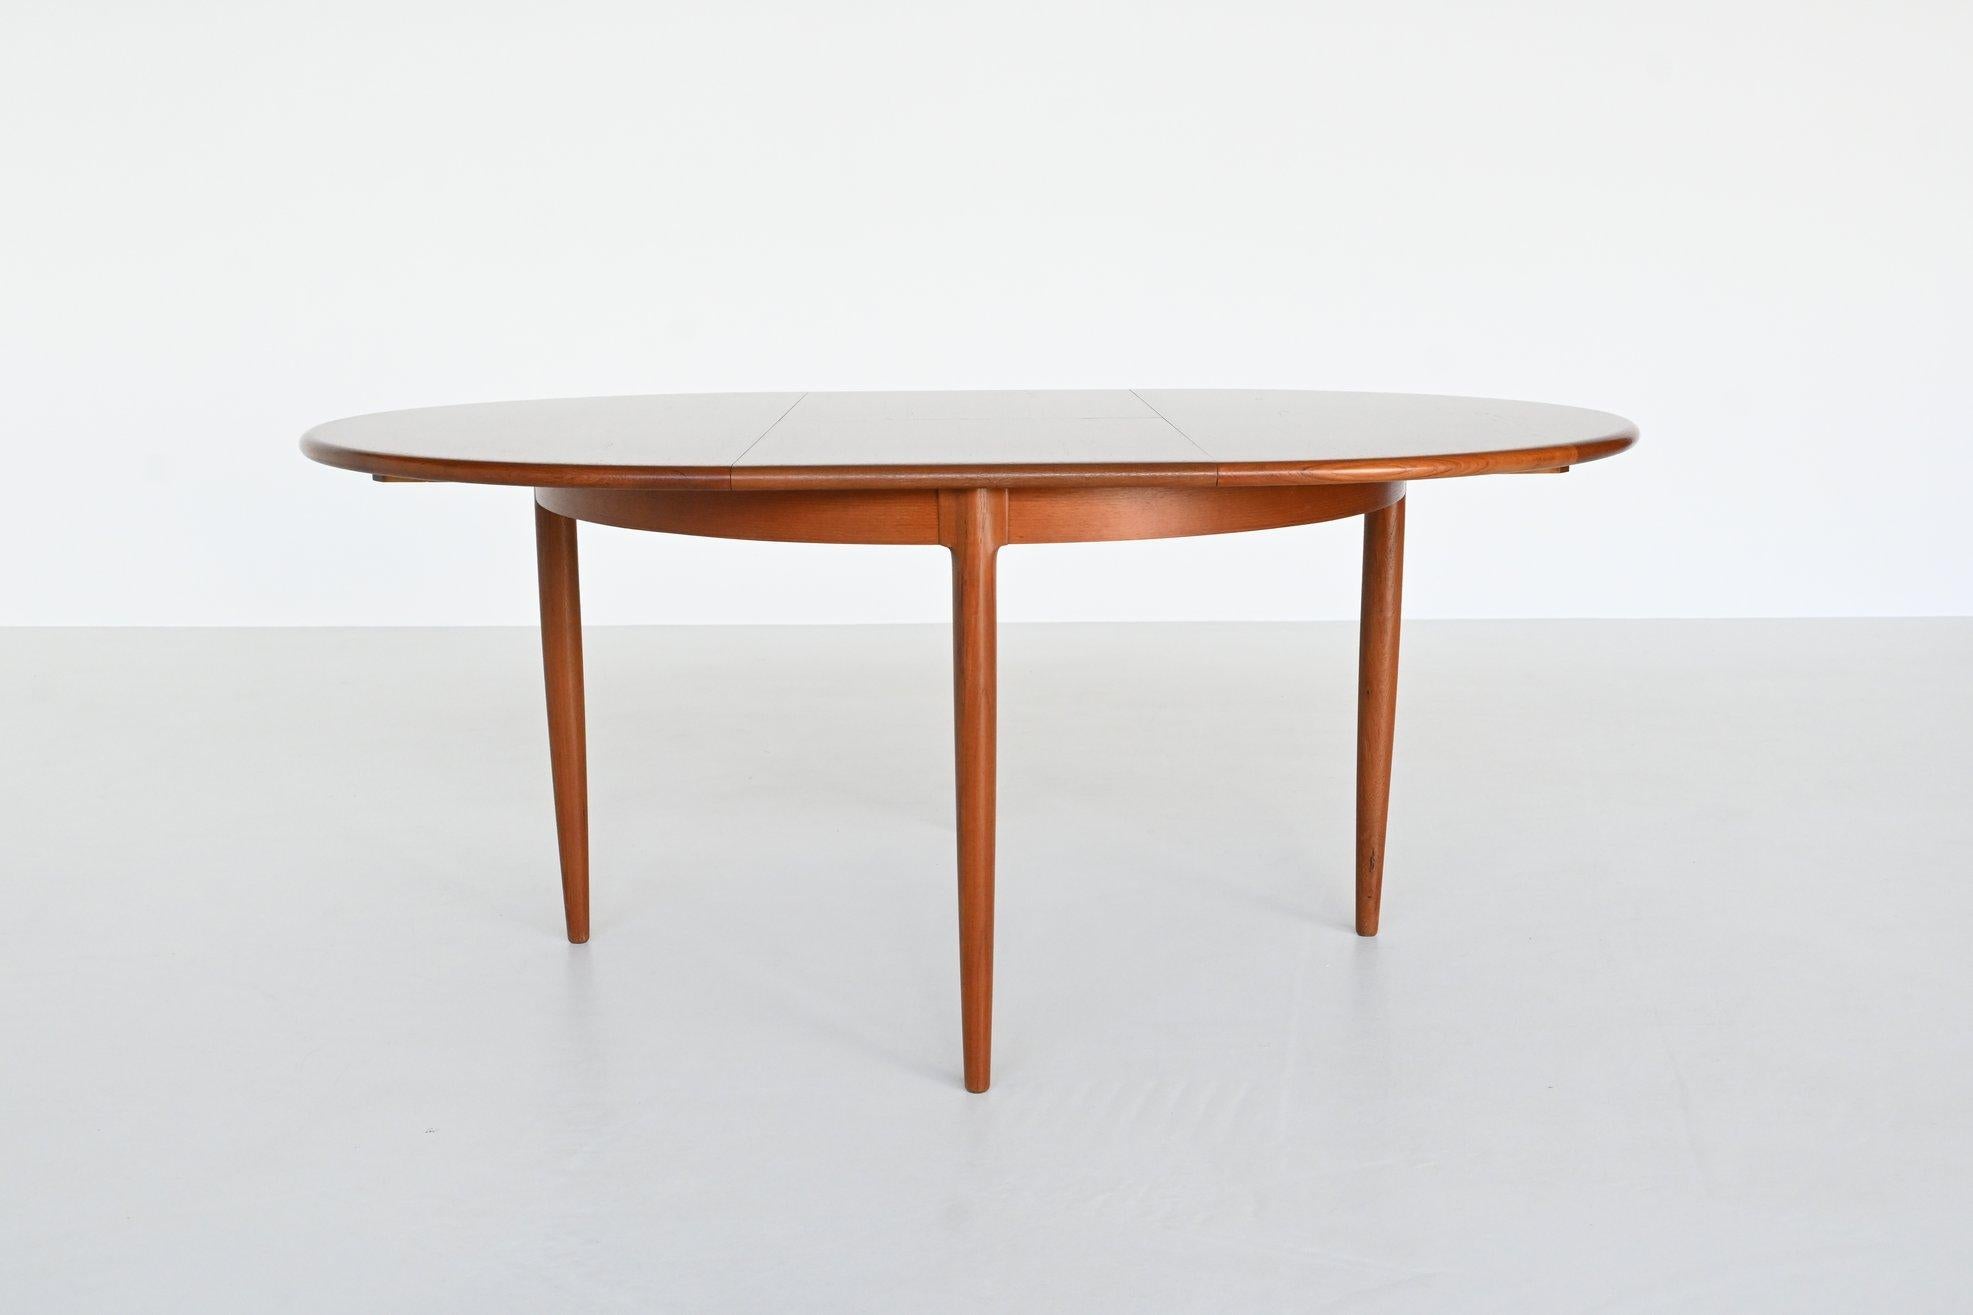 Beautiful shaped extendable dining table model 15 designed by Niels Otto Moller for J.L. Møller Møbelfabrik, Denmark, 1960. This table is 100 cm round and extendable using a foldable extension leave up to a length of 150 cm. The self-storing